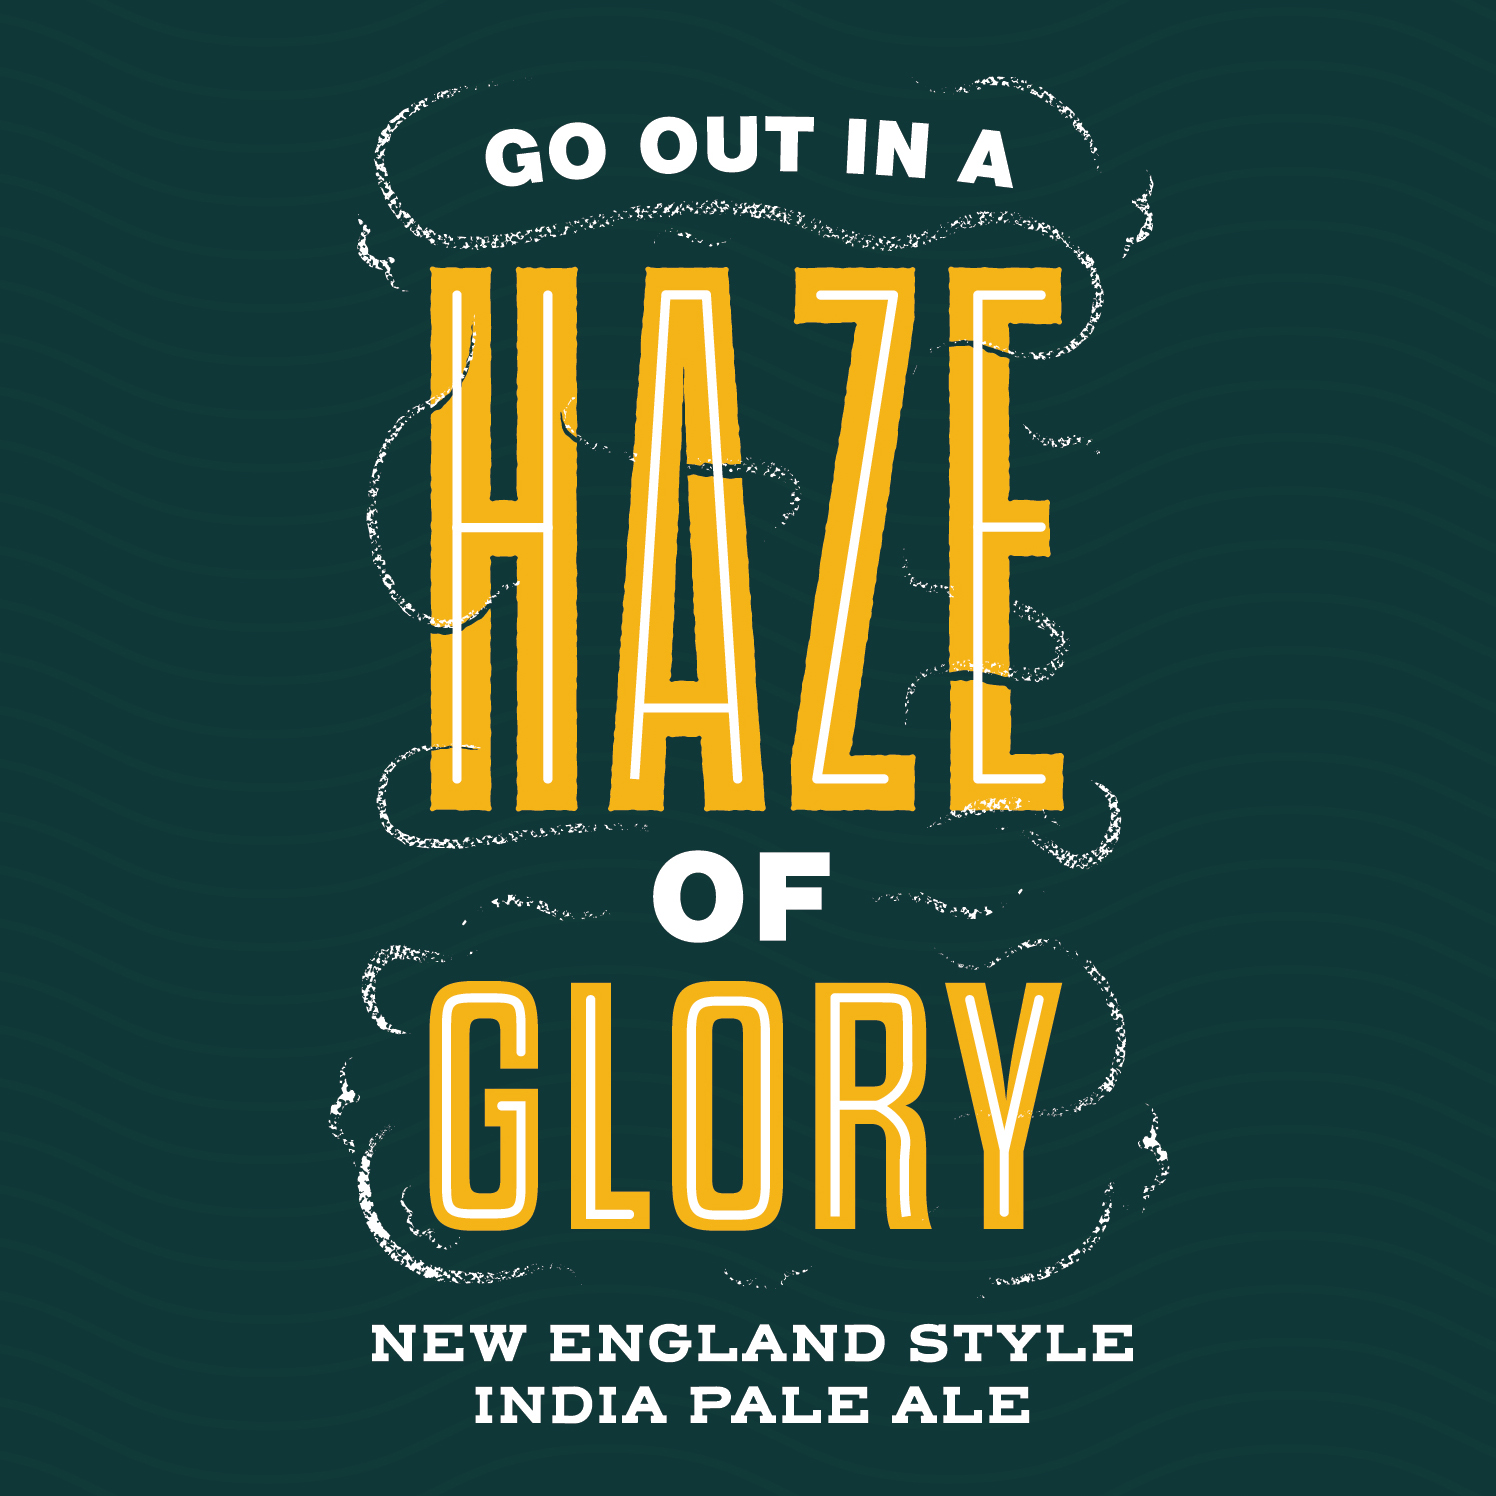 Image result for duclaw haze of glory